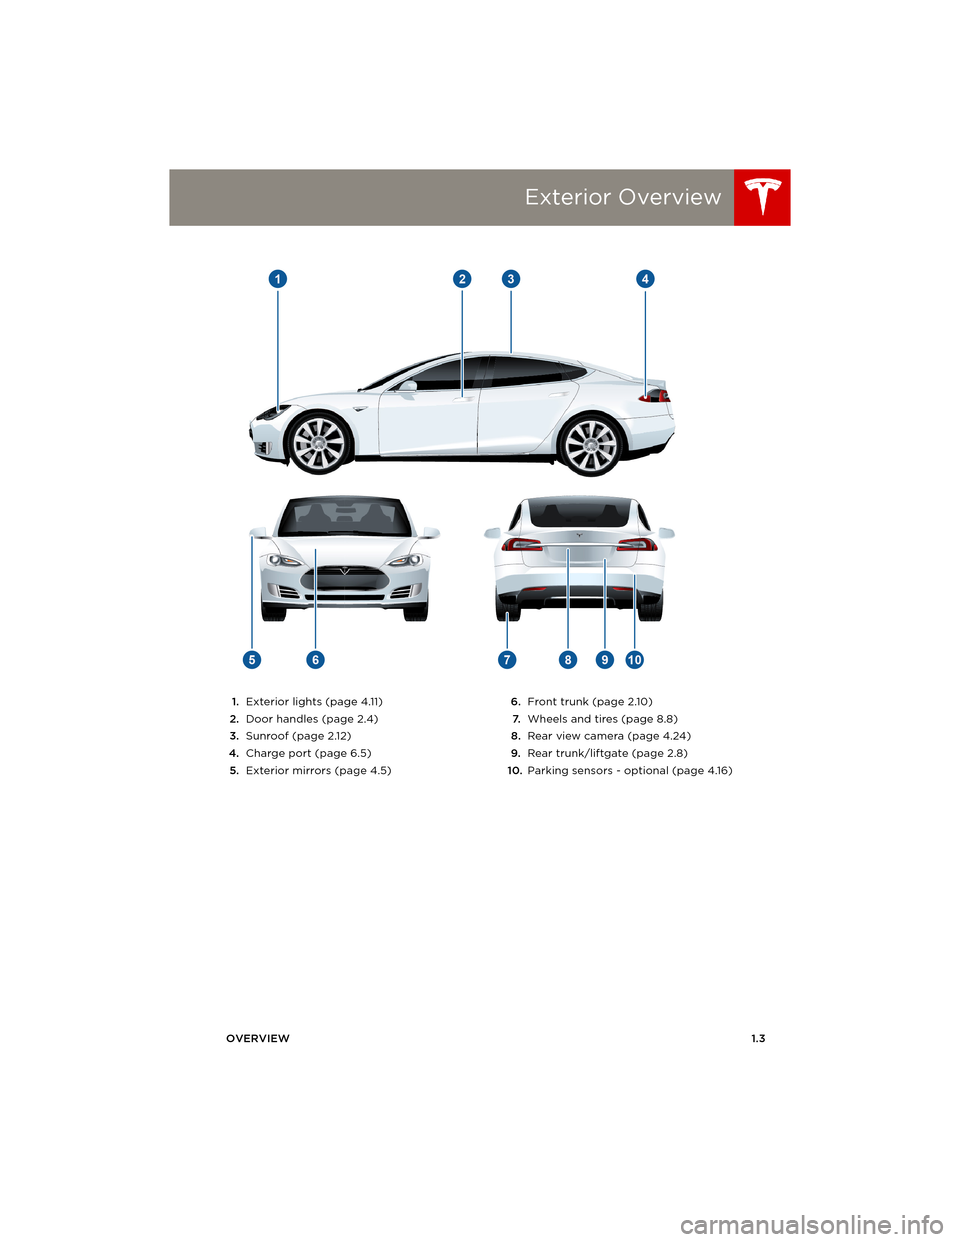 TESLA MODEL S 2014  Owners manual (Europe) Exterior Overview
OVERVIEW1.3
Exterior Overview
1.Exterior lights (page 4.11)
2.Door handles (page 2.4)
3.Sunroof (page 2.12)
4.Charge port (page 6.5)
5.Exterior mirrors (page 4.5)6.Front trunk (page 